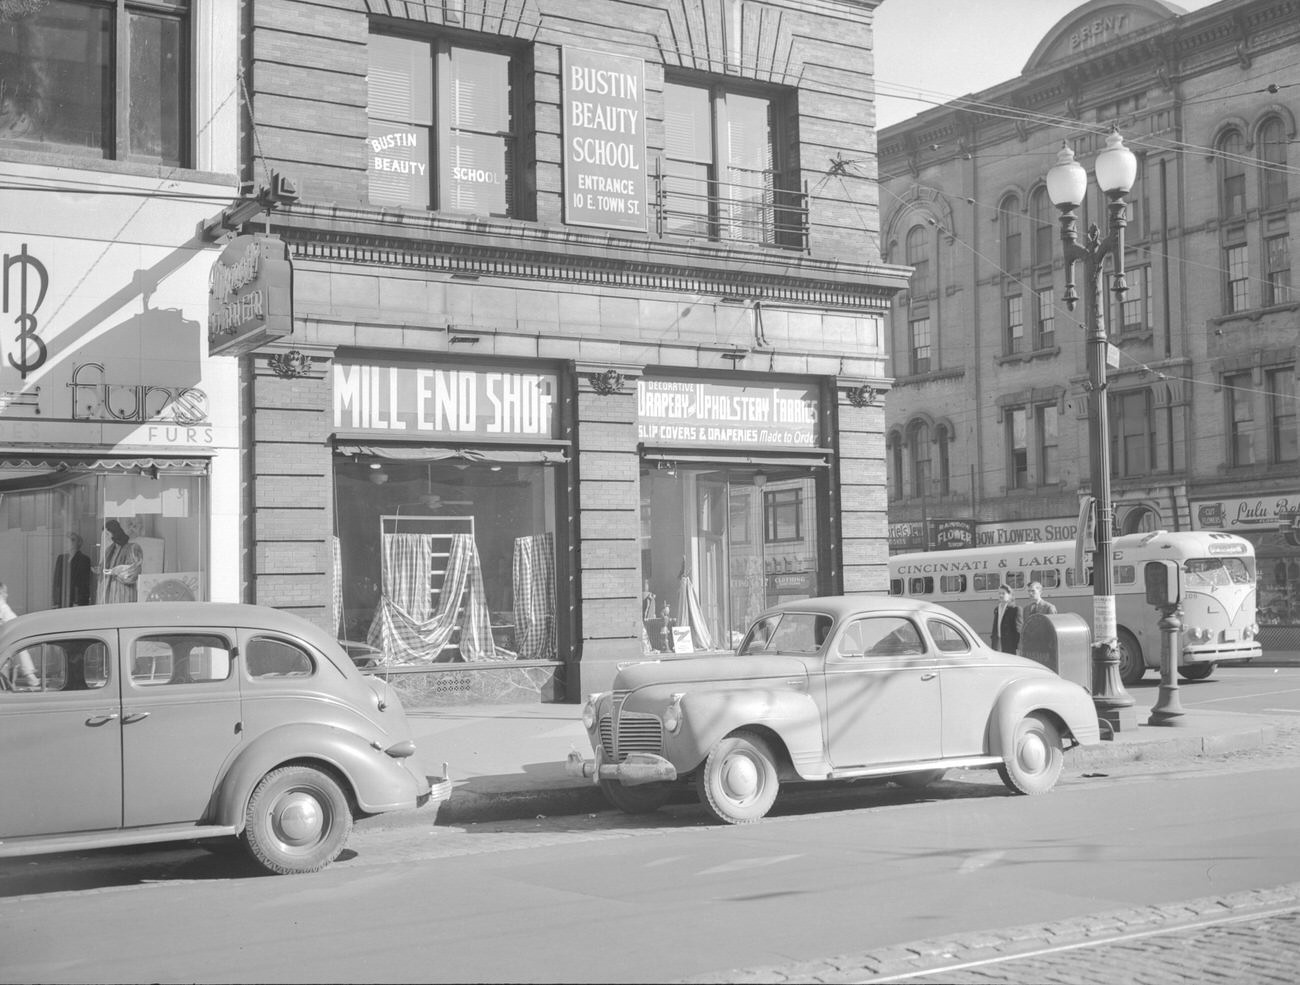 Brent and Grange Buildings at E Town Street and S High Street, featuring Bloom Fur Company and Rainbow Flower Shop, 1947